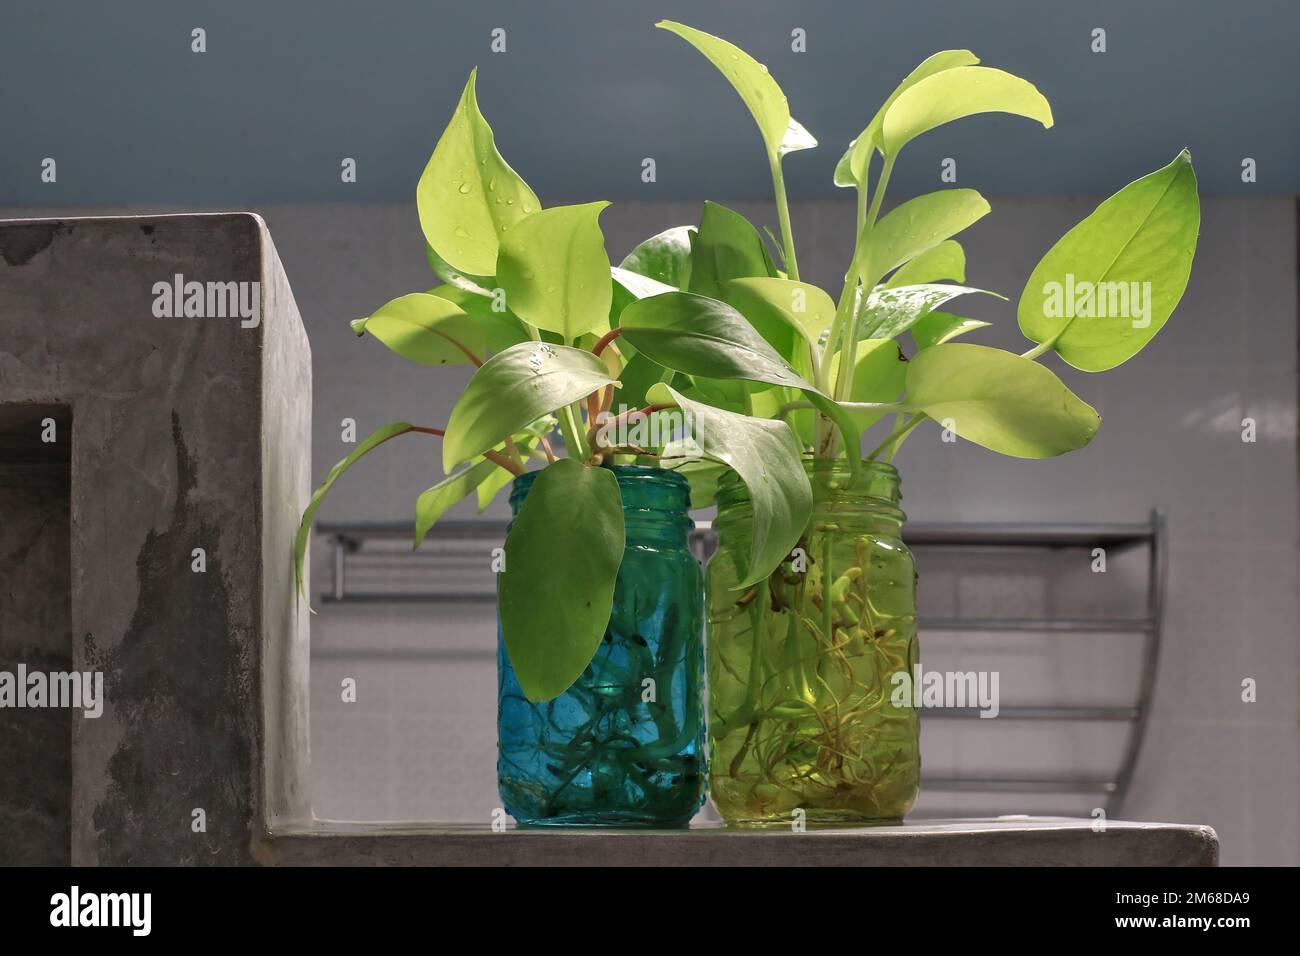 Golden pothos (Scindapsus aureus) add a touch of freshness to the bathroom. Planted in a clear, square glass. Stock Photo